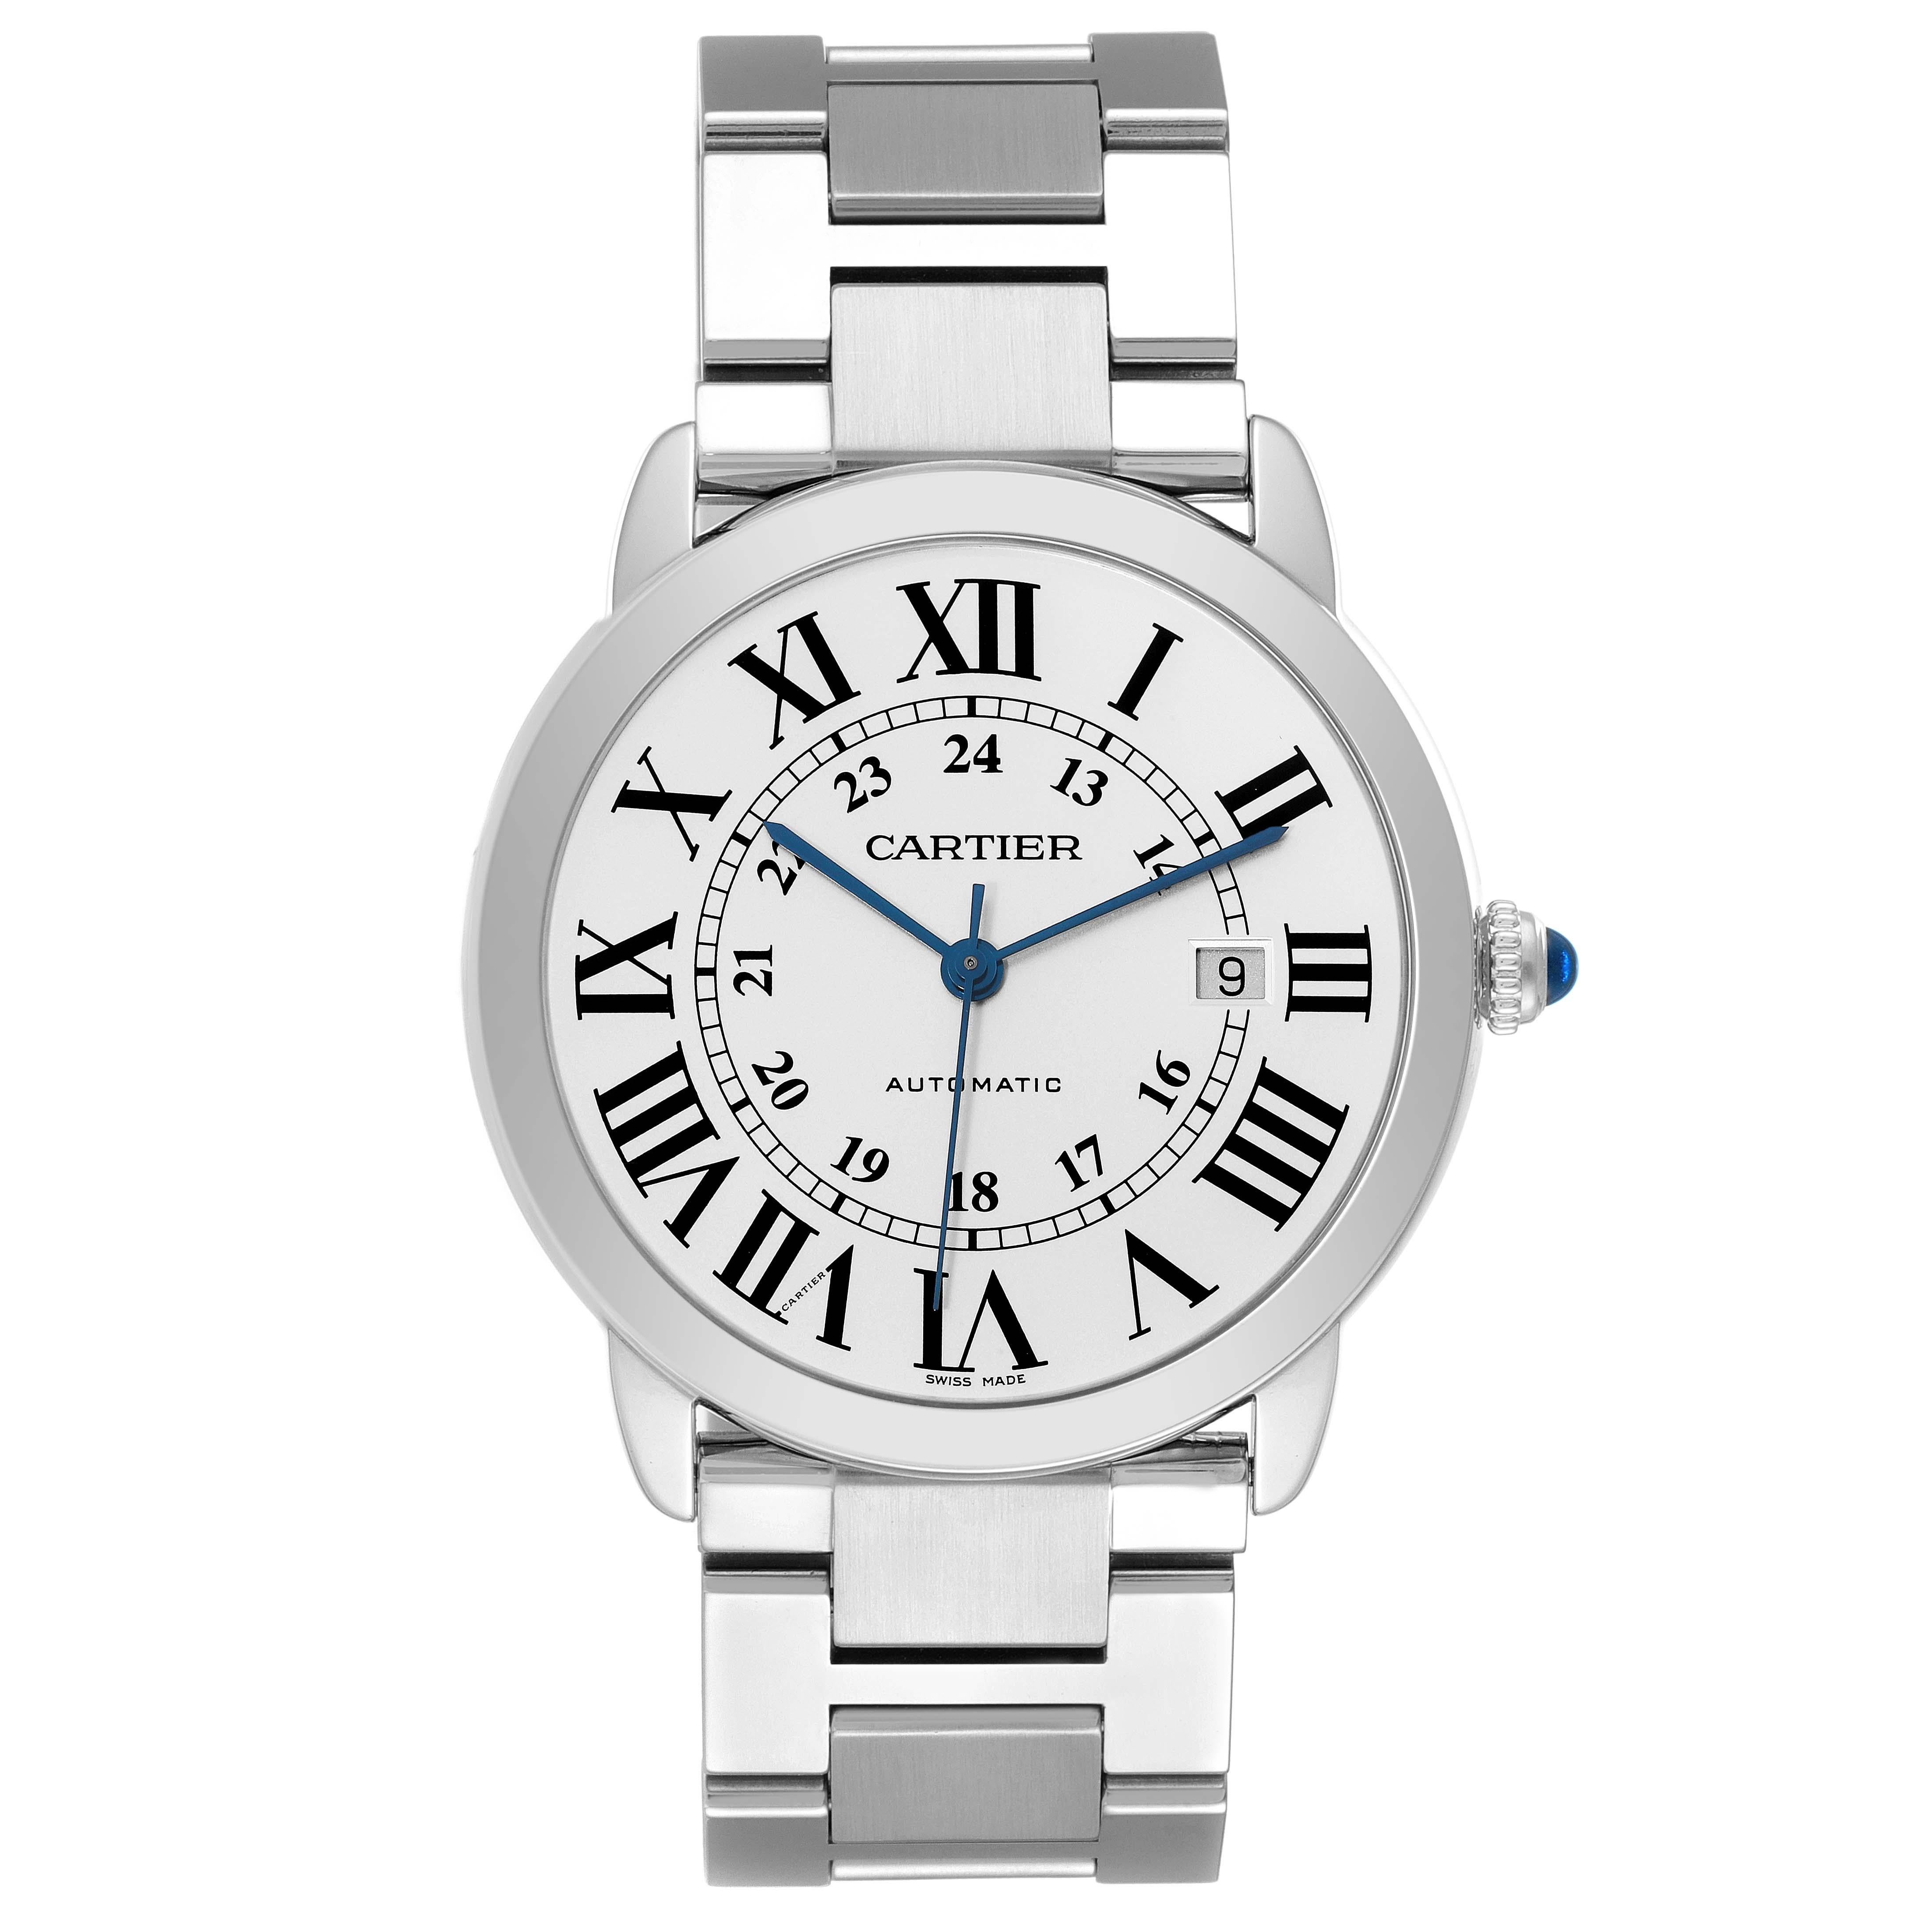 Cartier Ronde Solo XL Silver Dial Automatic Mens Watch W6701011. Automatic self-winding movement. Stainless steel case 42.0 mm in diameter. Circular grained crown set with the blue spinel cabochon. . Scratch resistant sapphire crystal. Silvered